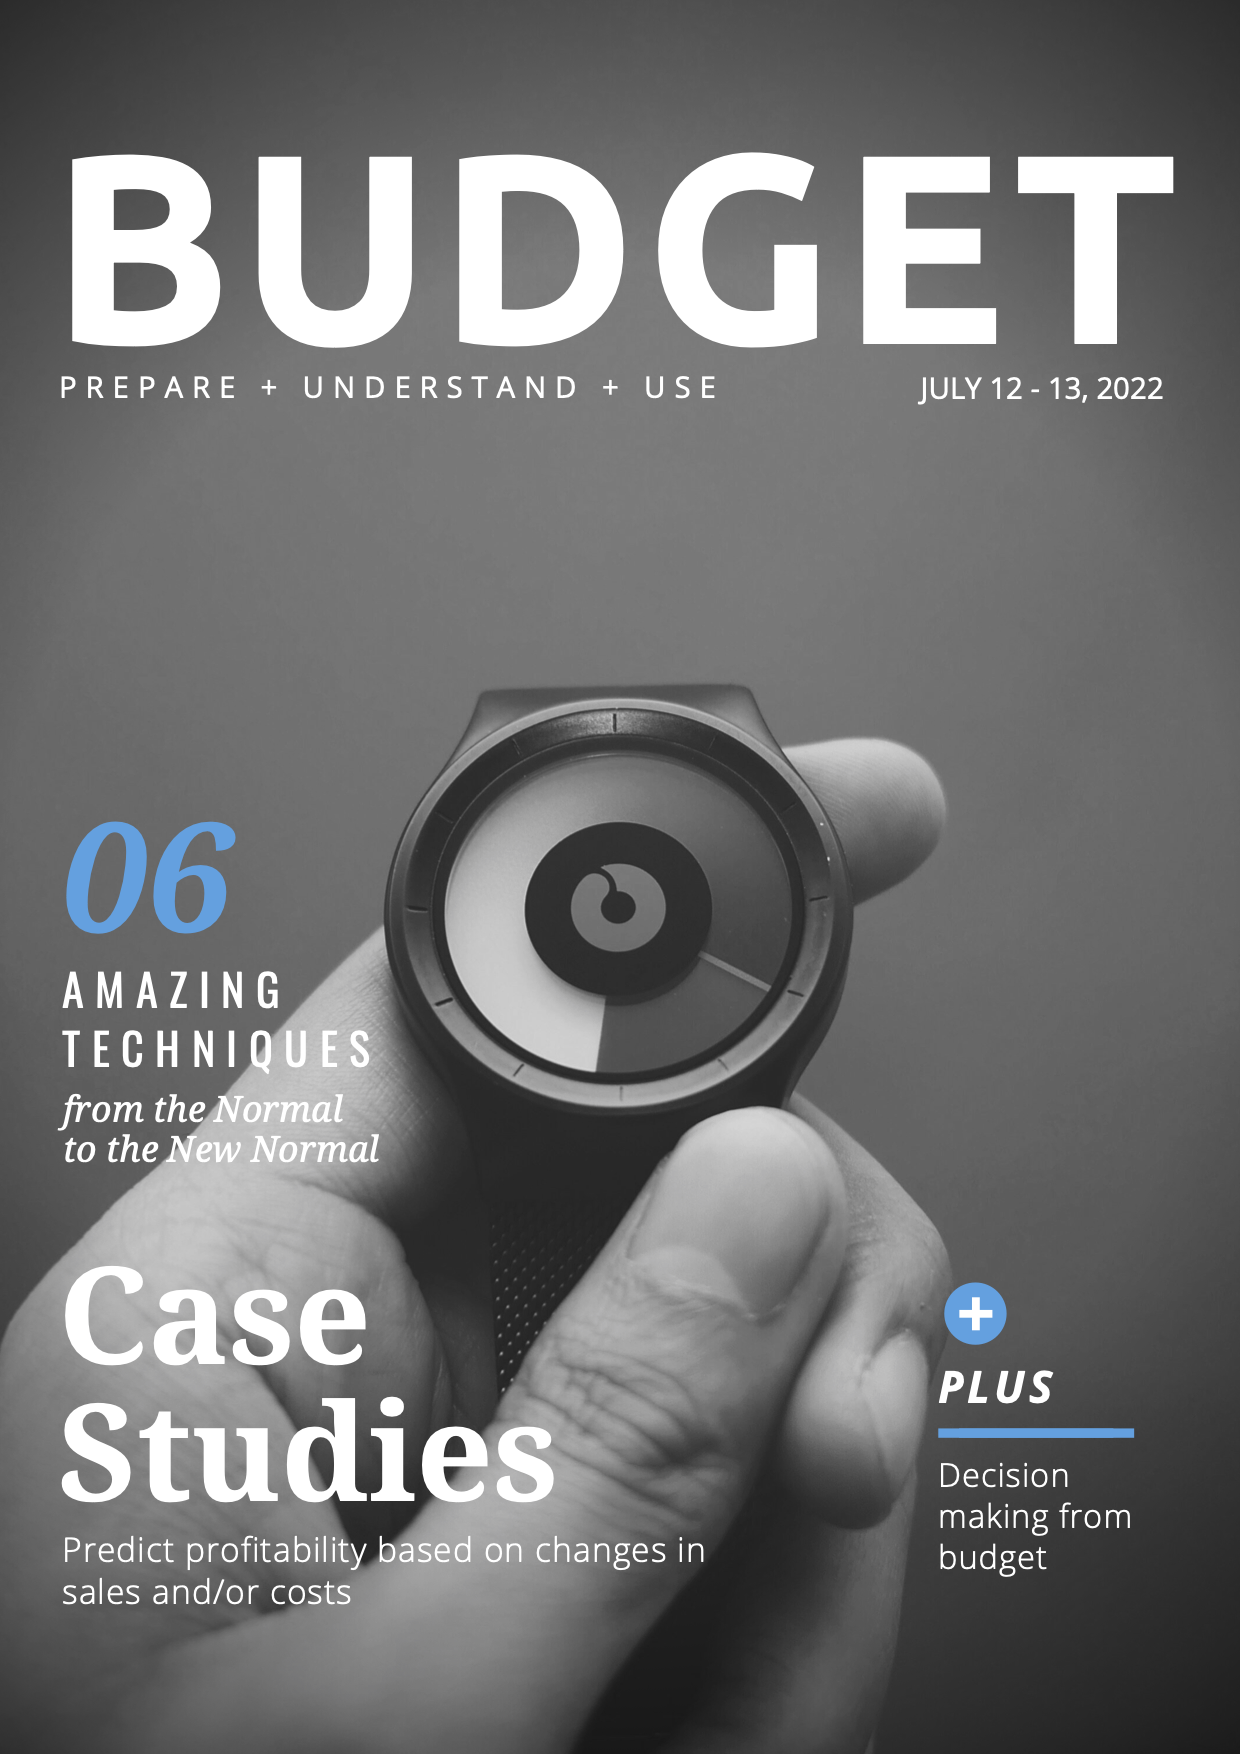 How to Prepare, Understand and Use Budgets